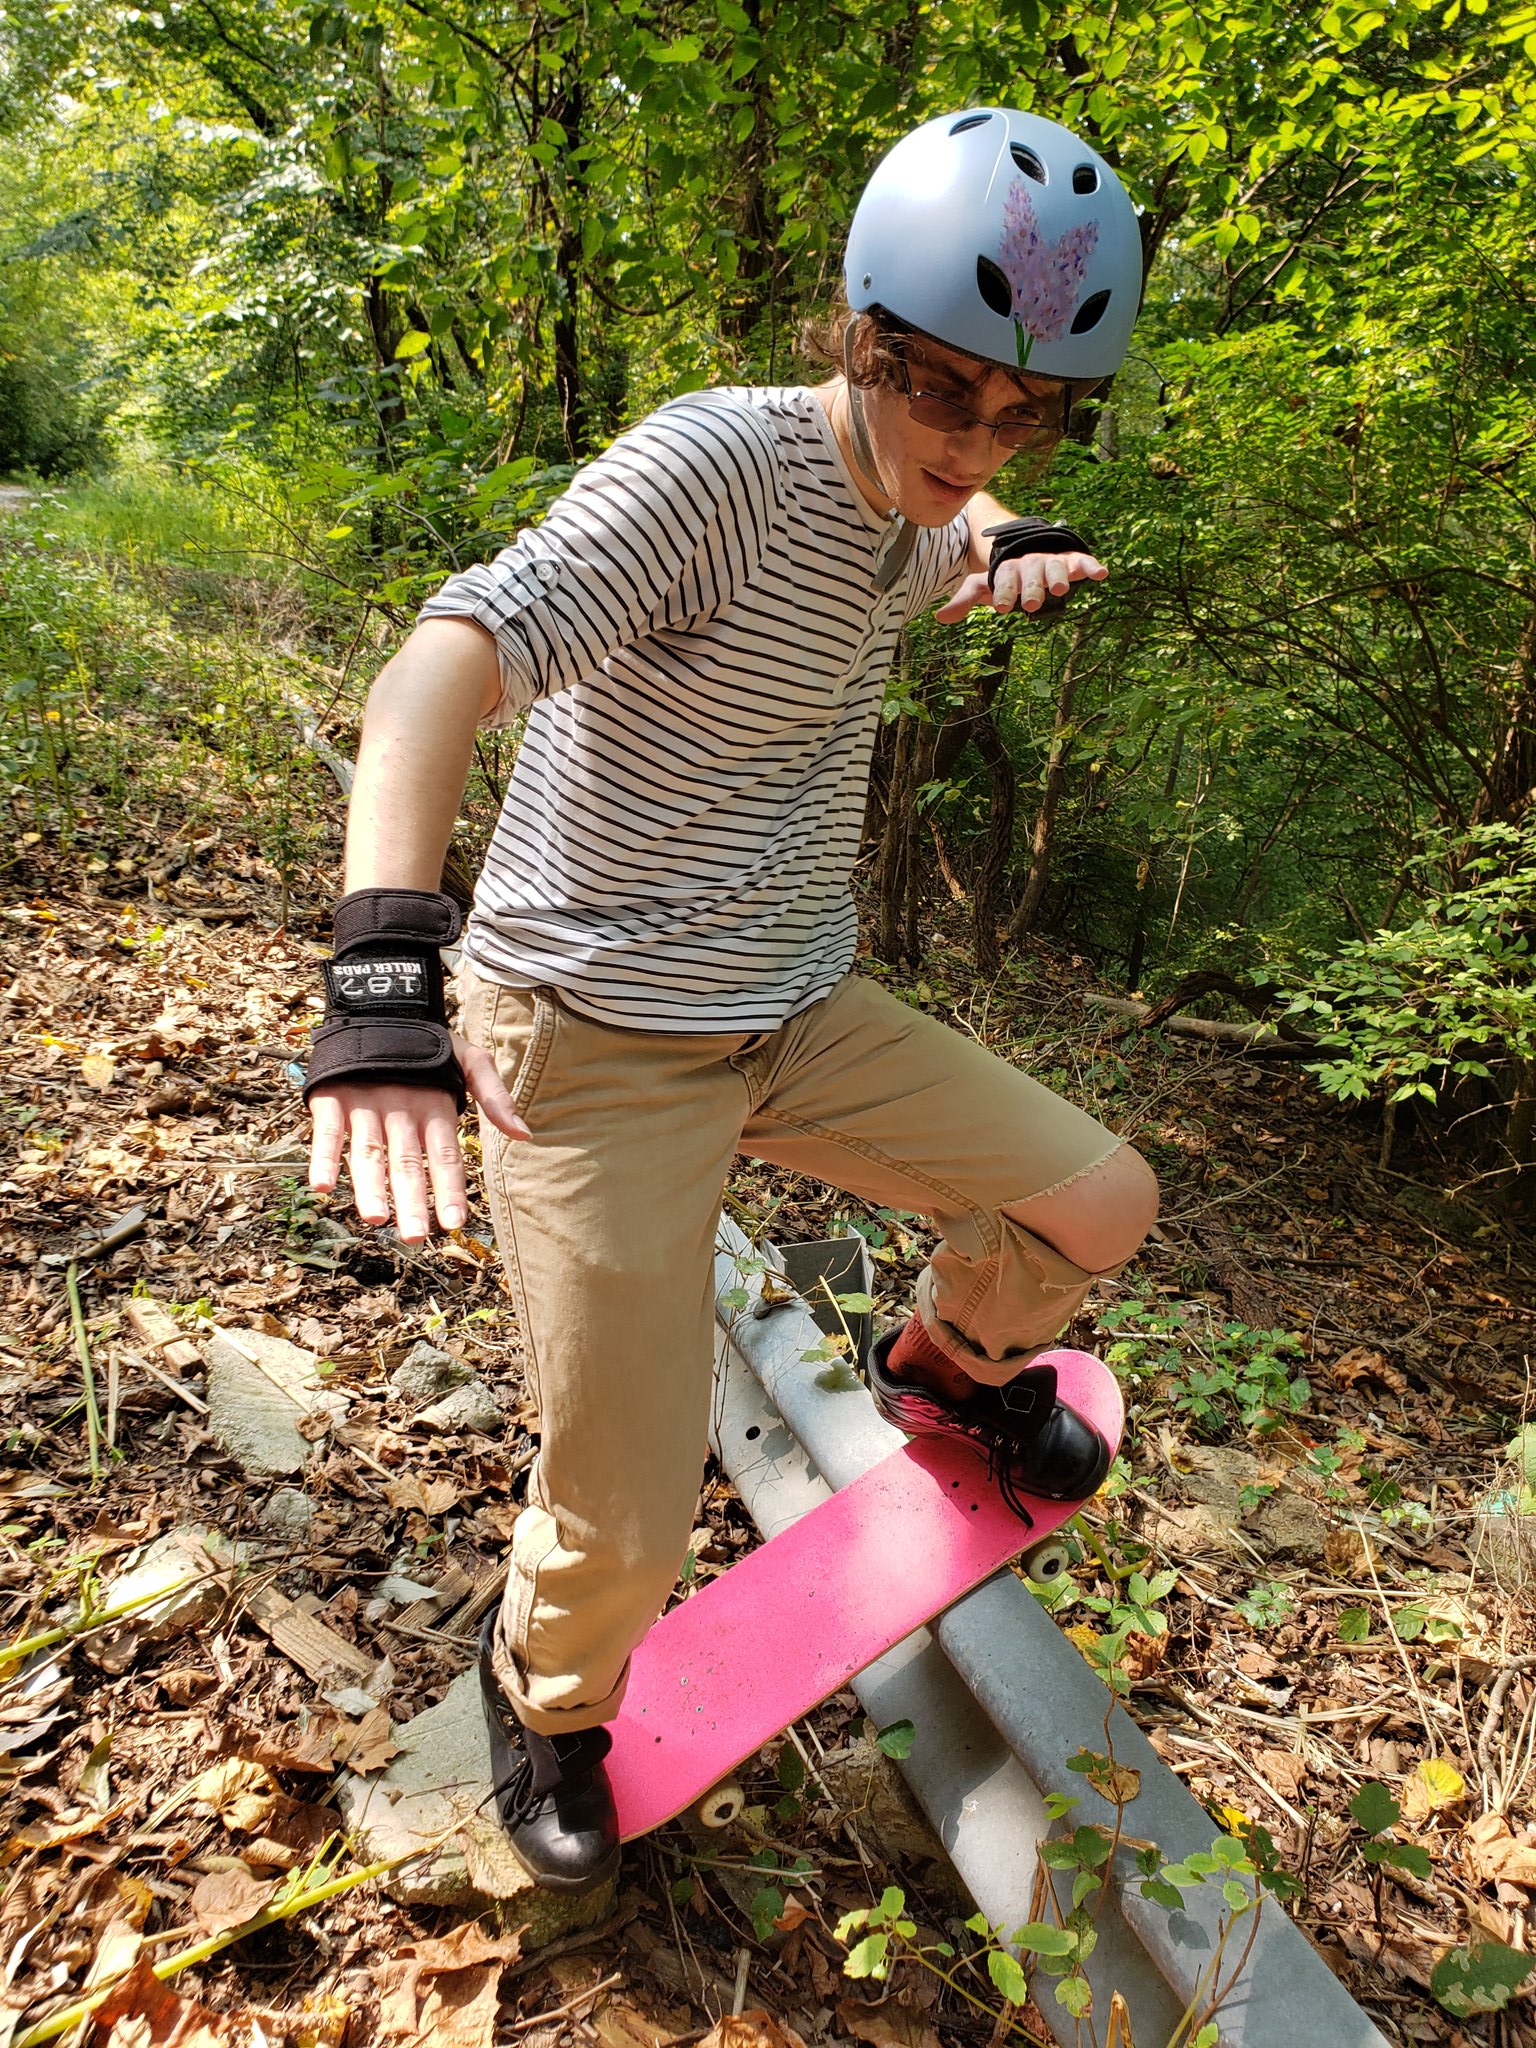 a horizontal black/white striped shirt, tan jeans that are ripped on the knee, a blue biking helmet with a lilac painted on it, wrist pads, a pink skateboard, and black hiking boots. im grinding on an abandoned road railing